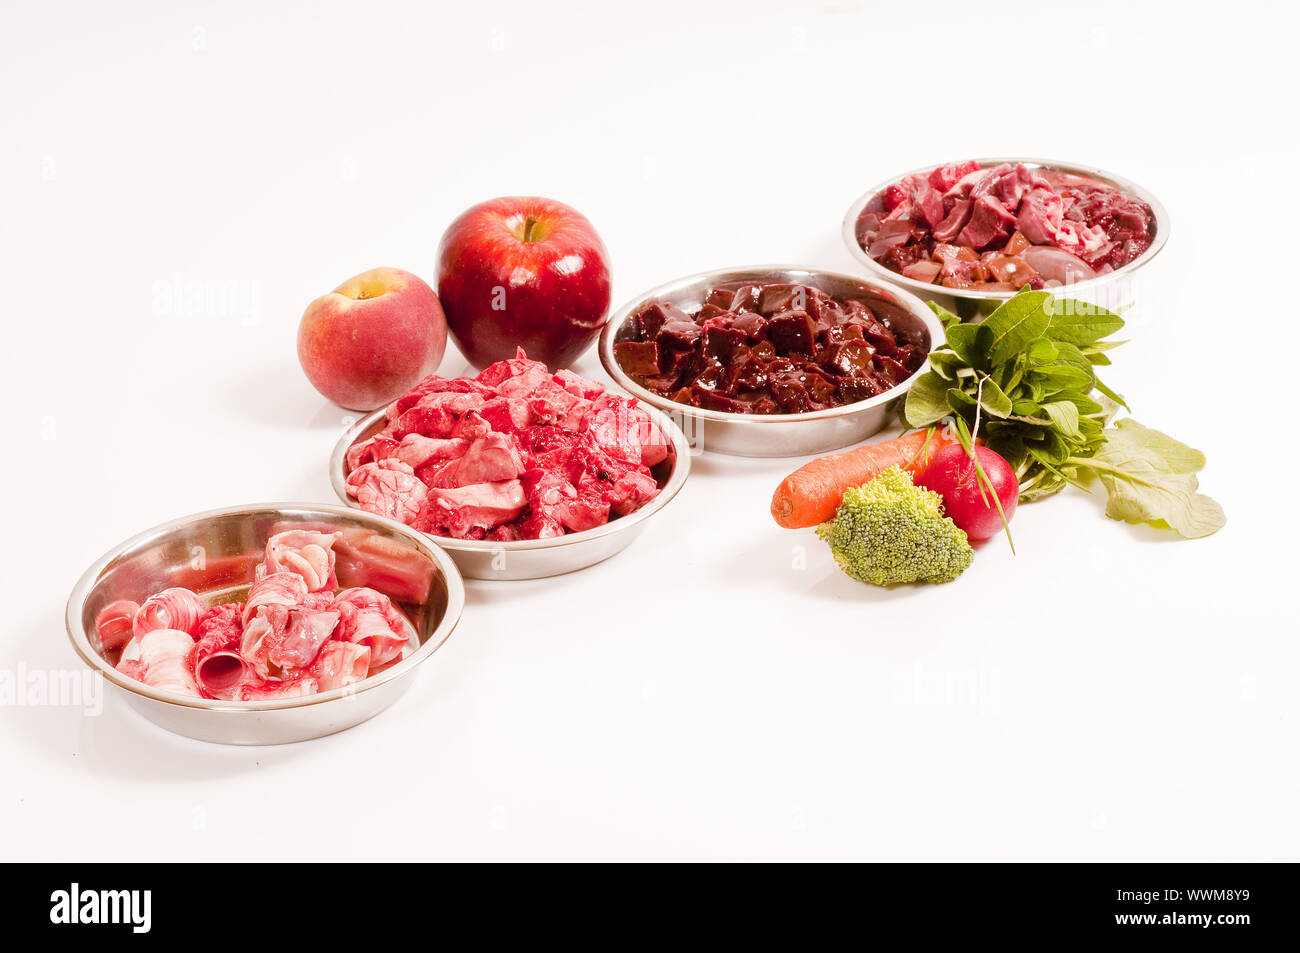 Barf: raw meat with vegetable and fruit portions, ready-prepared Stock Photo